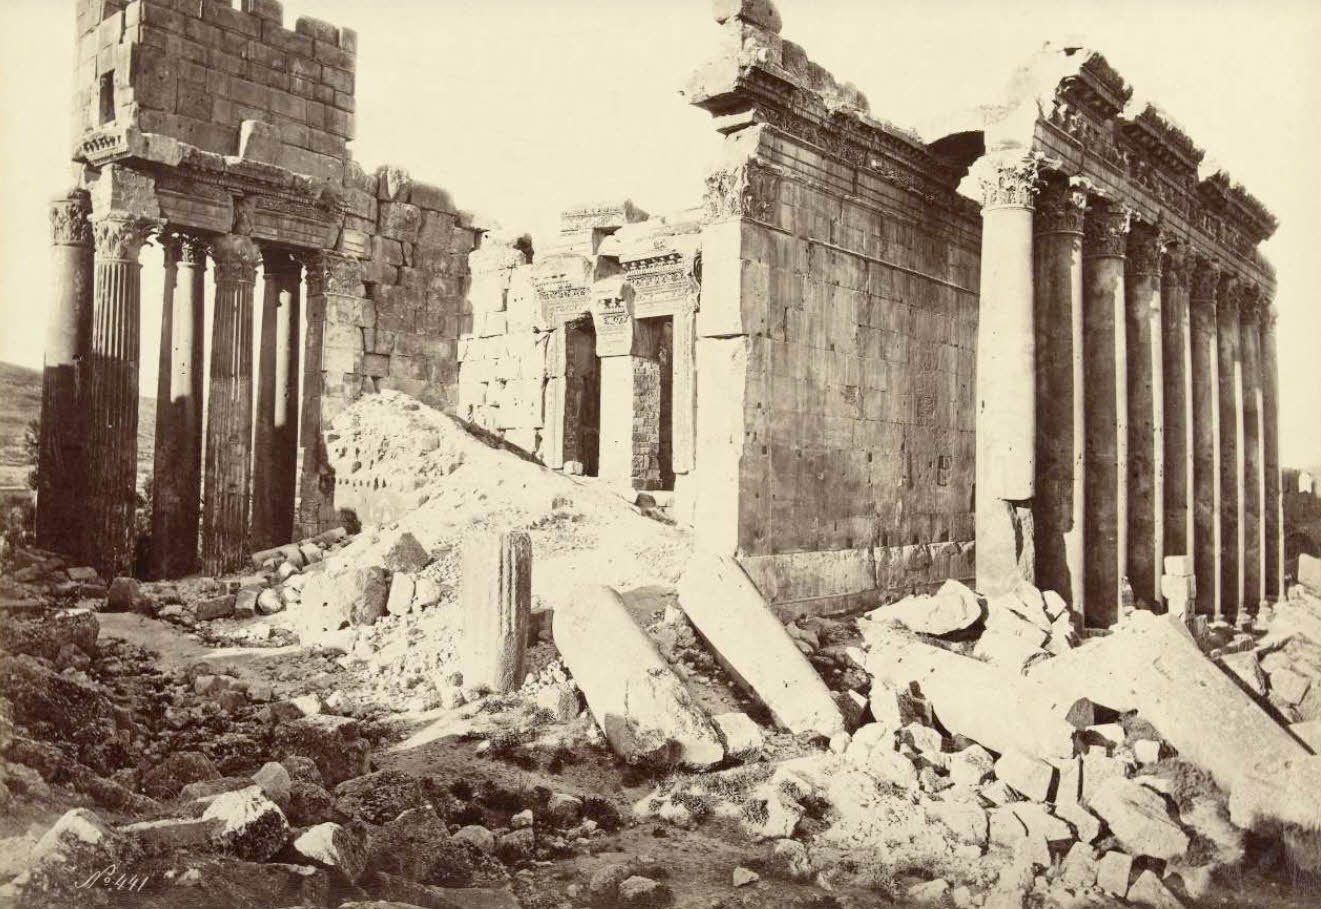 Temple of Jupiter in Baalbec in Syria as seen in 1800s. Photographer: Anonymous.